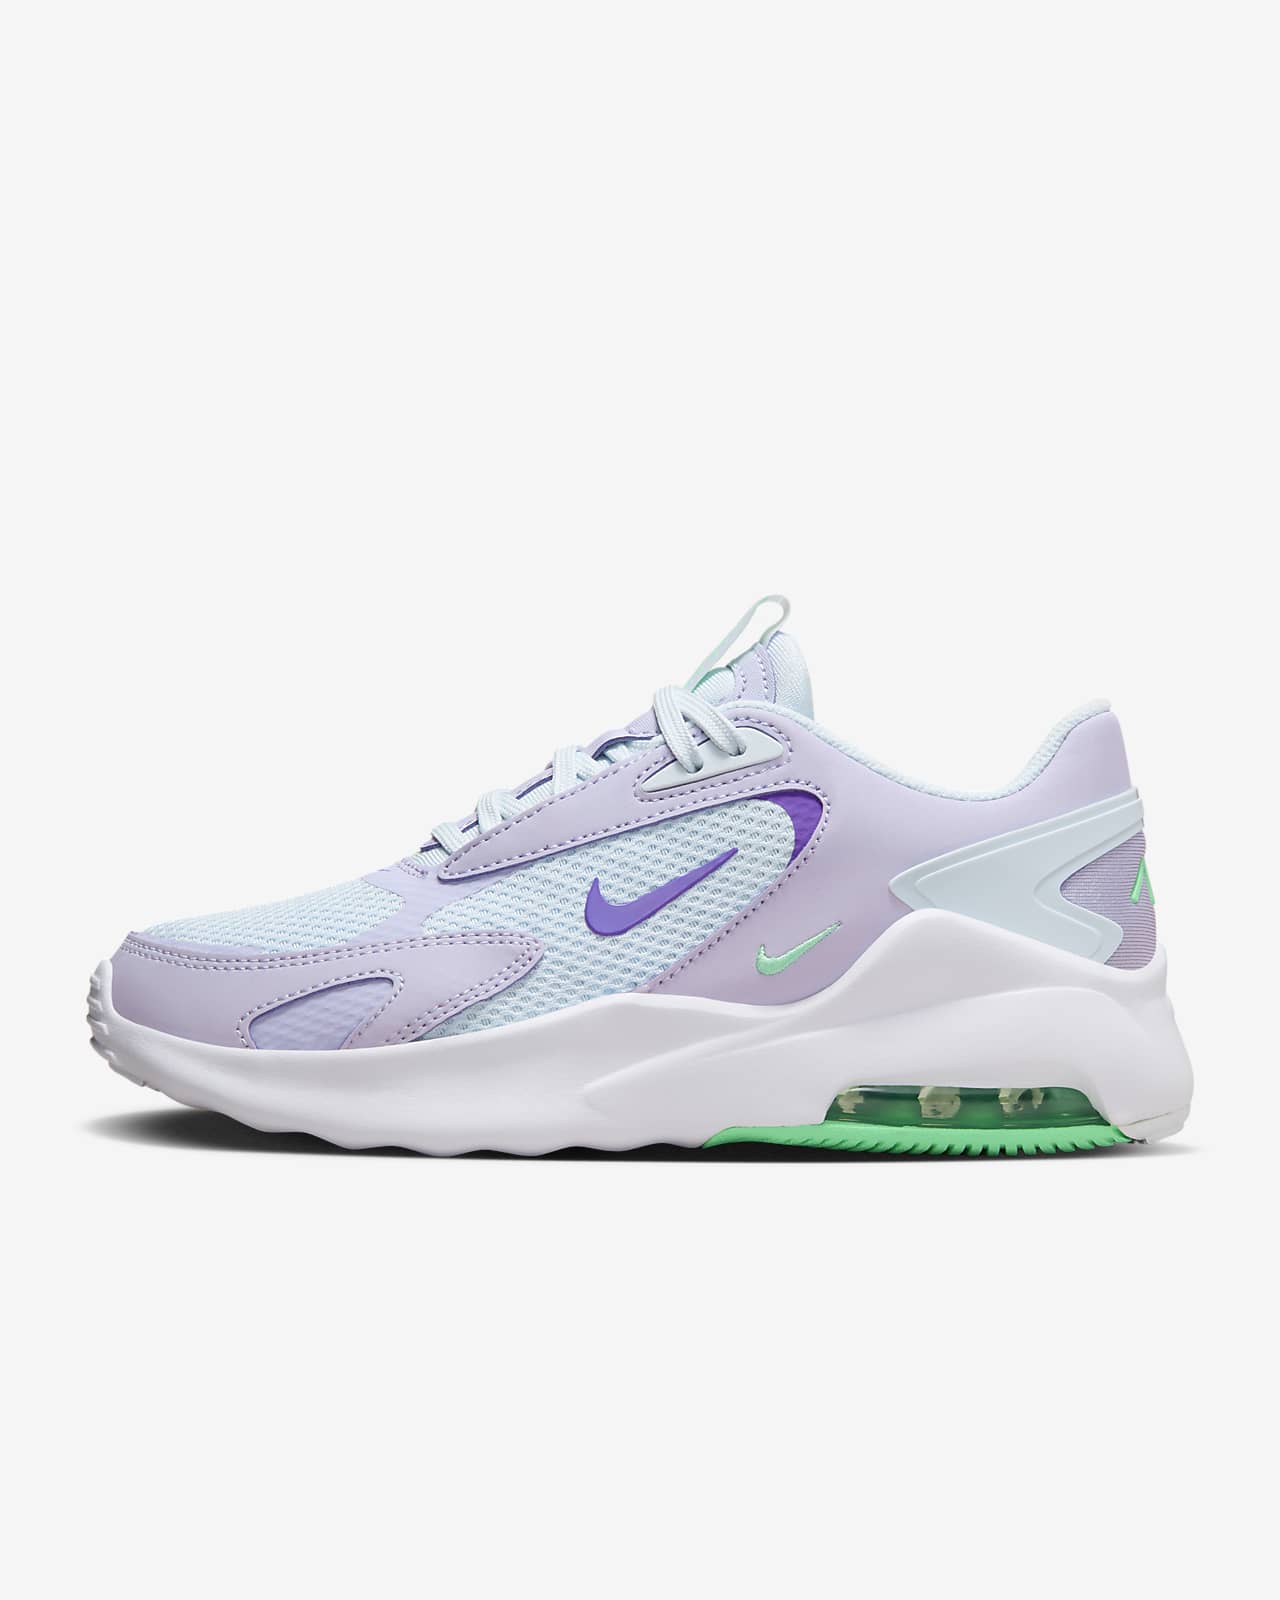 Nike Air Max Bolt Womens Shoes Review